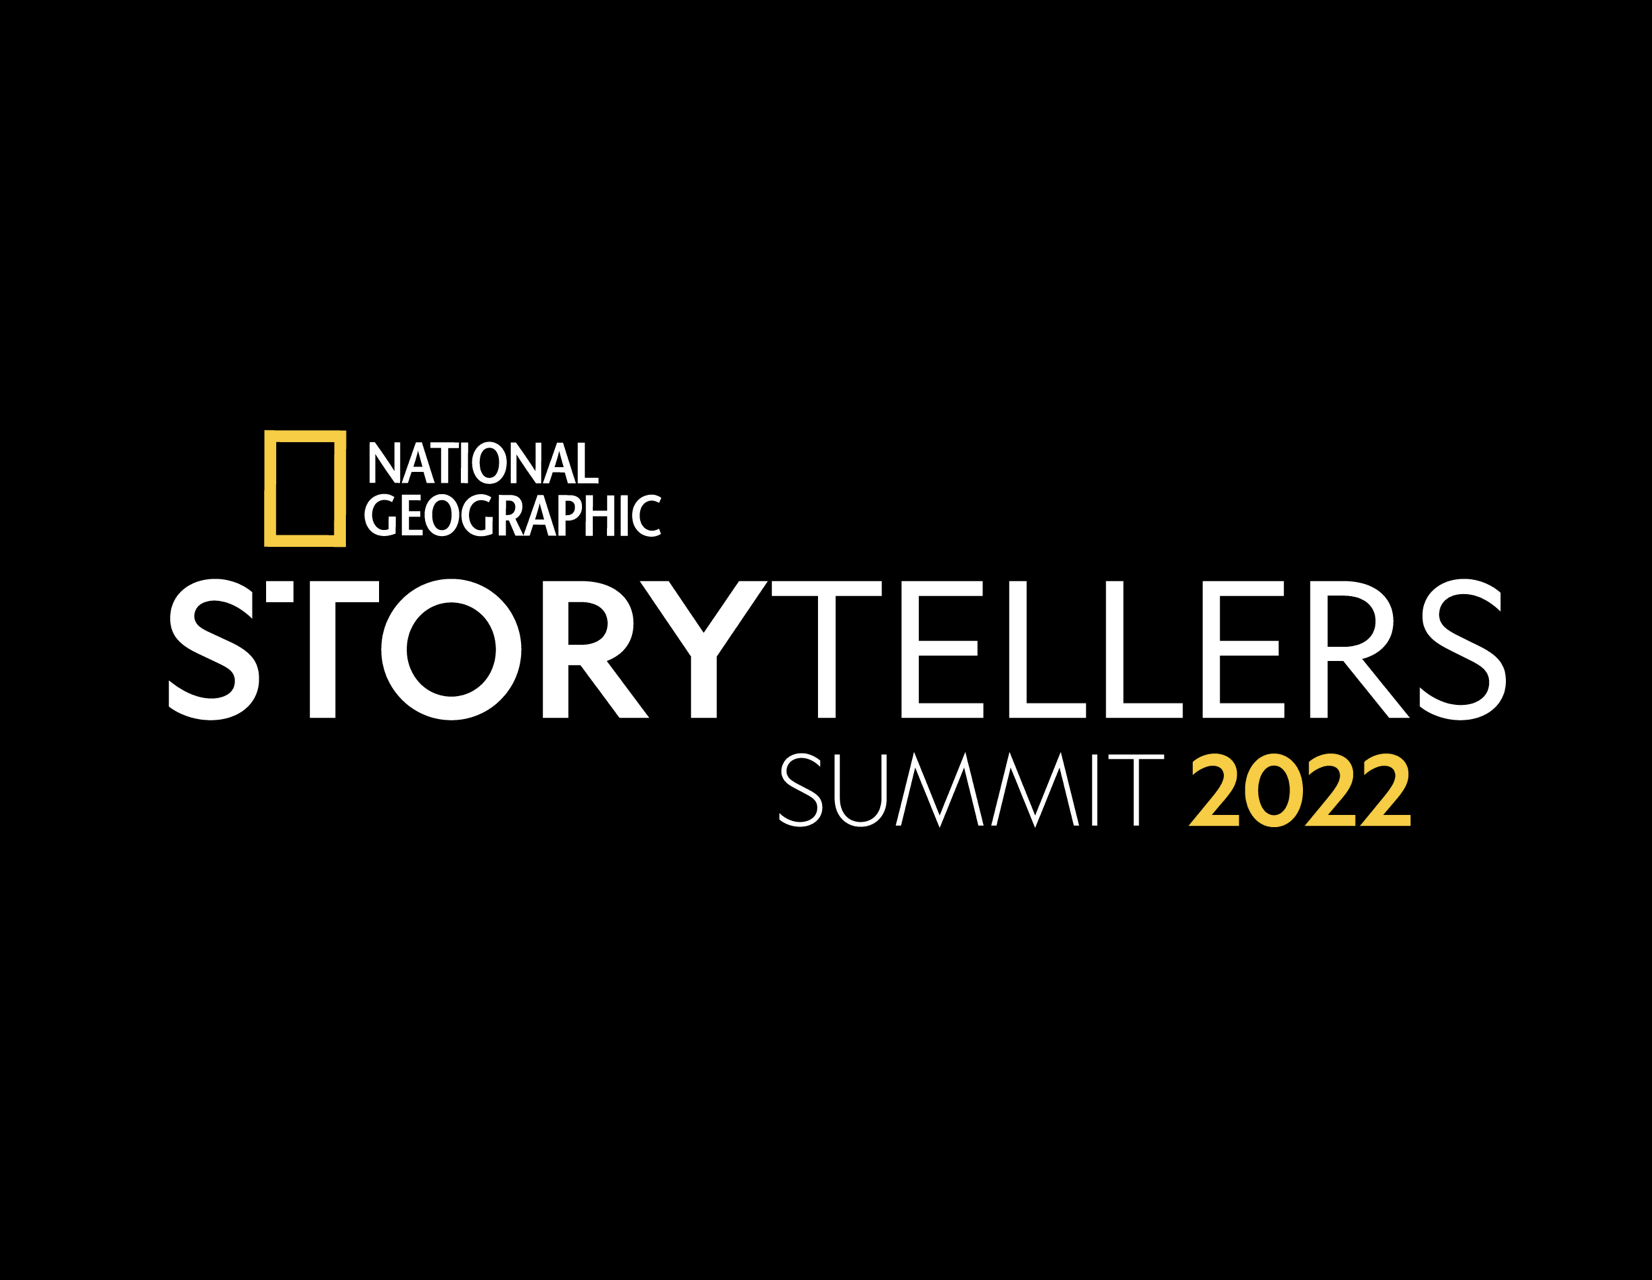 Thumbnail of National Geographic STORYTELLERS Summit 2022